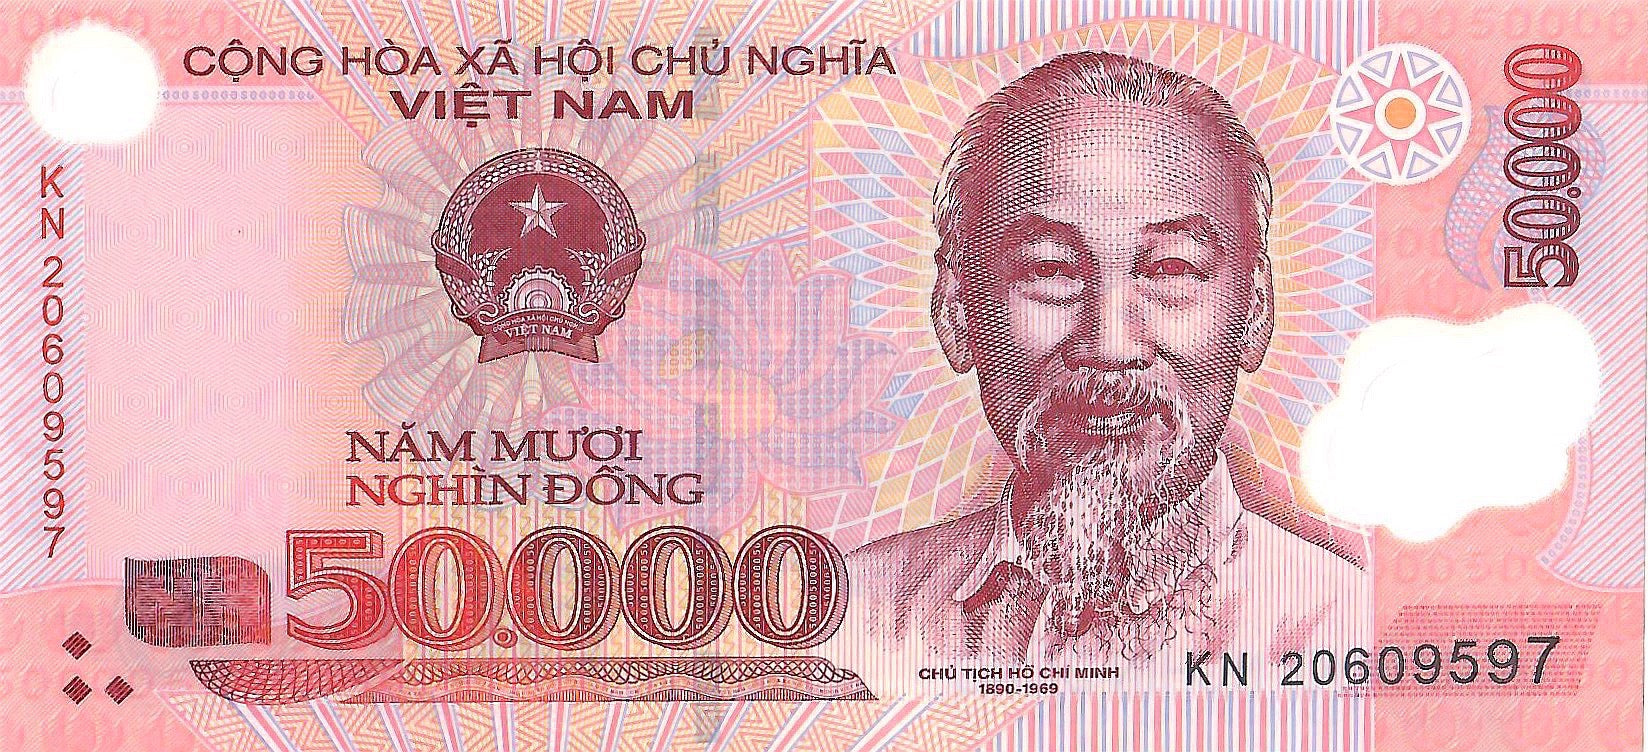 Vietnam 50,000 Dong Banknote, 2020, P-121n, UNC, Polymer